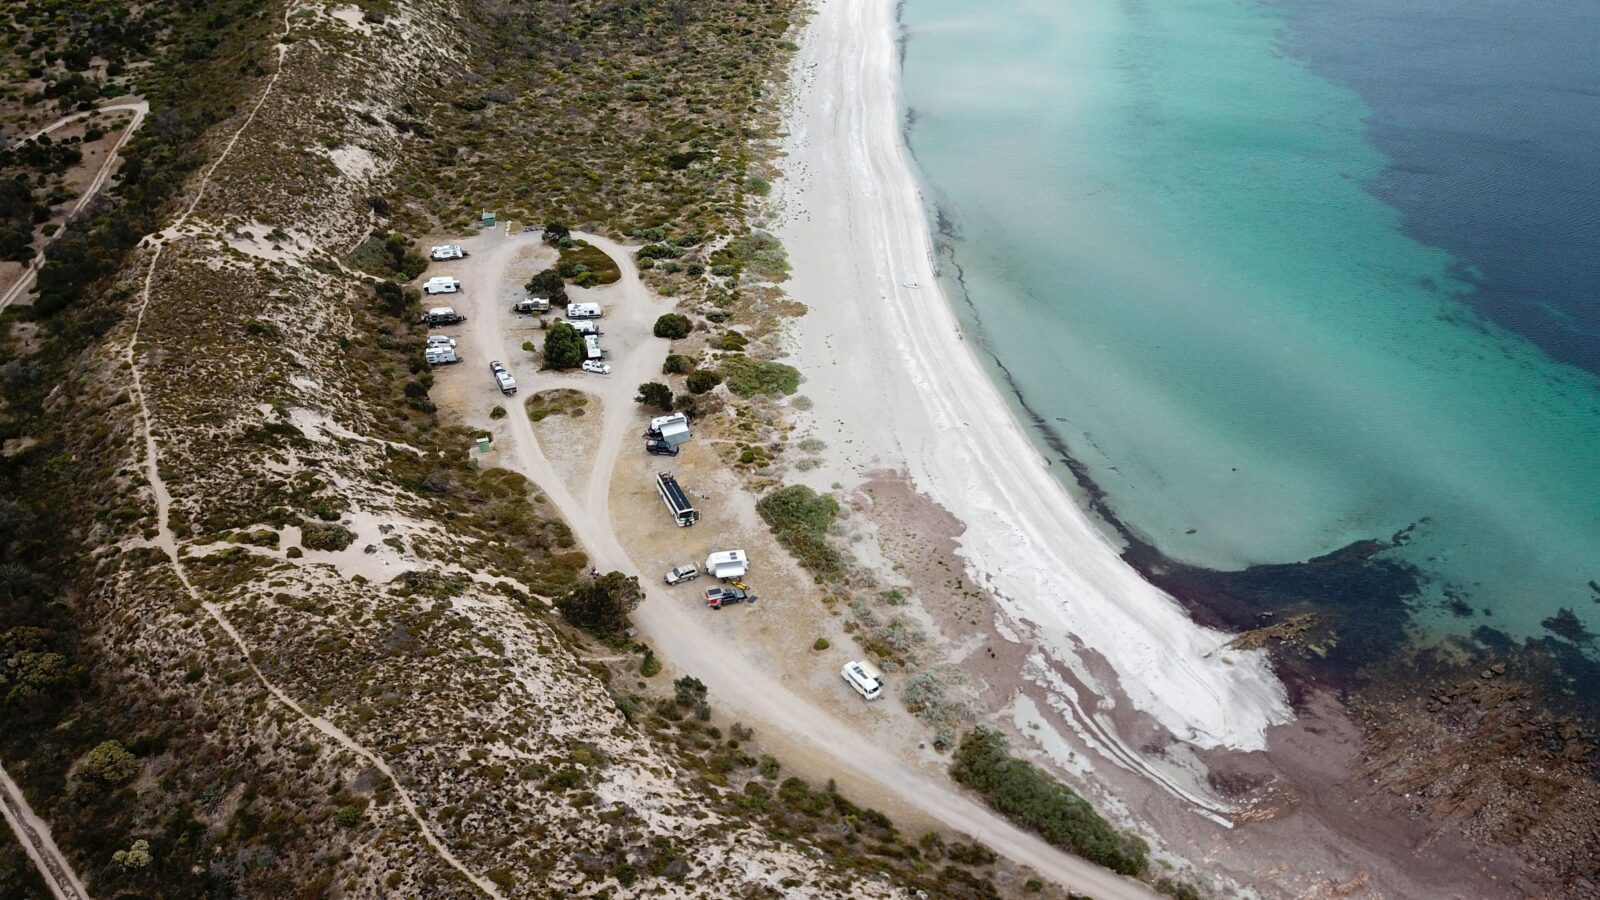 Drone view of campground alongside white sand and turquoise water